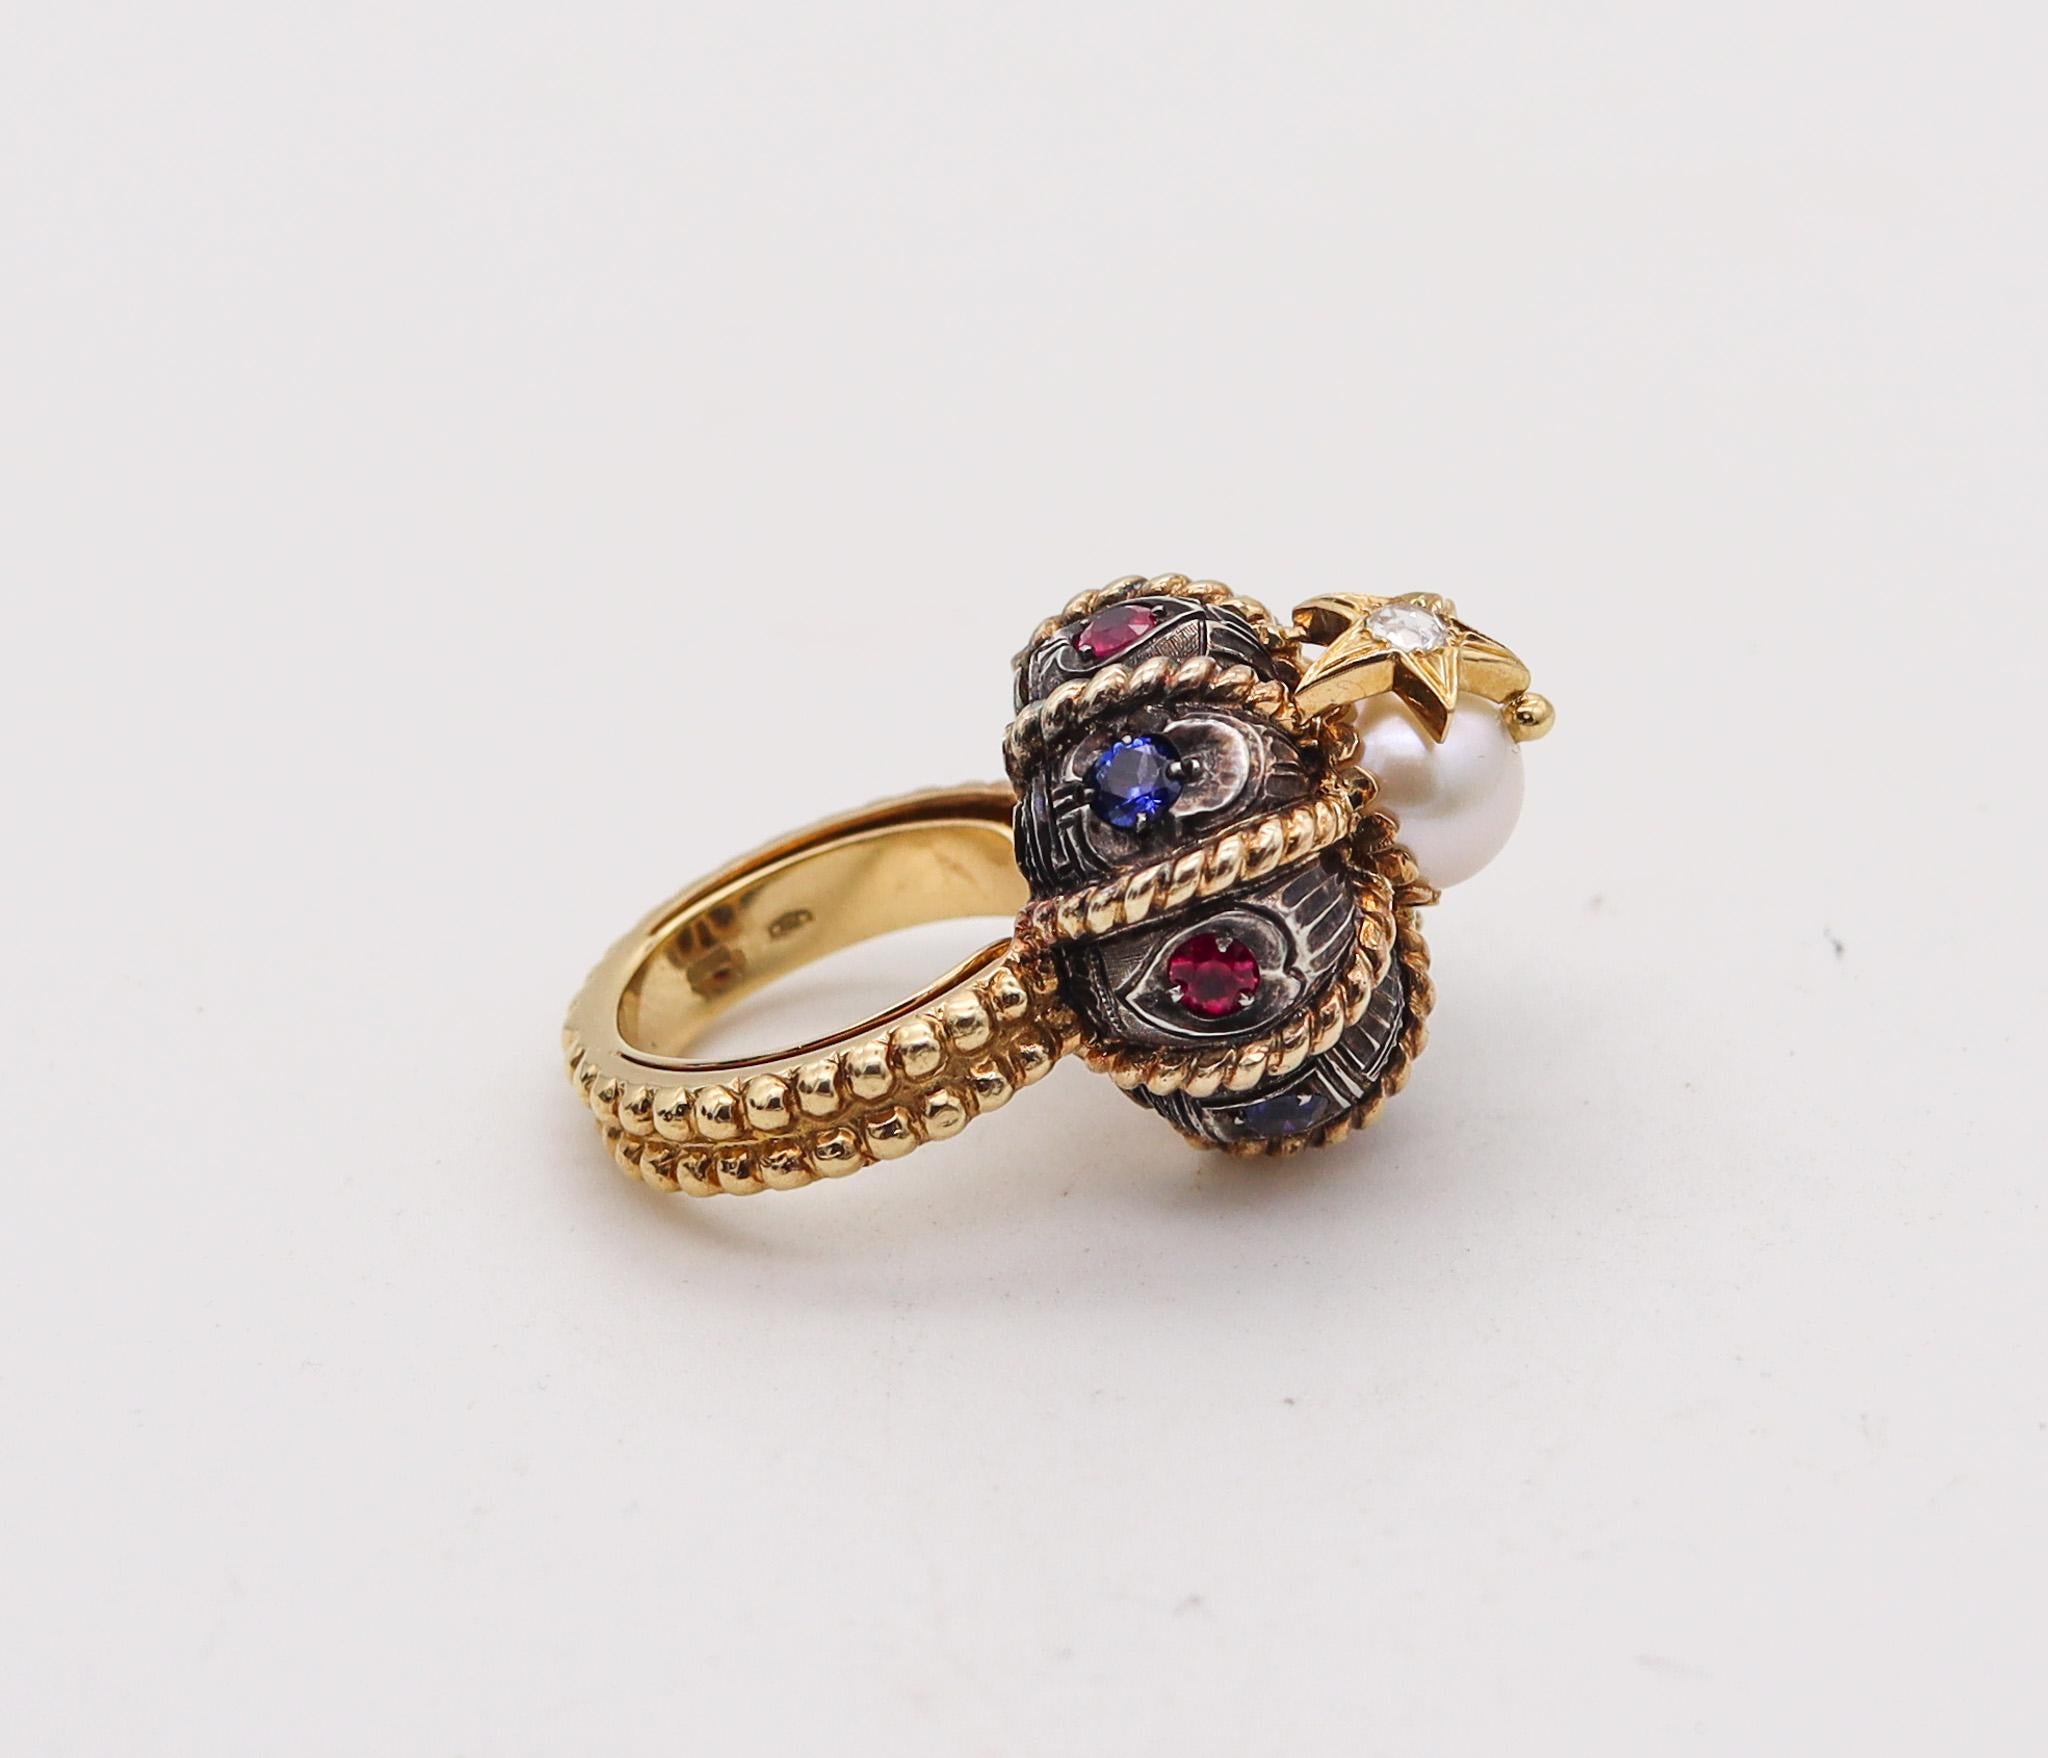 Modernist Nardi Venice Unusual Turban Cocktail Ring In 18Kt Gold With Color Gemstones For Sale